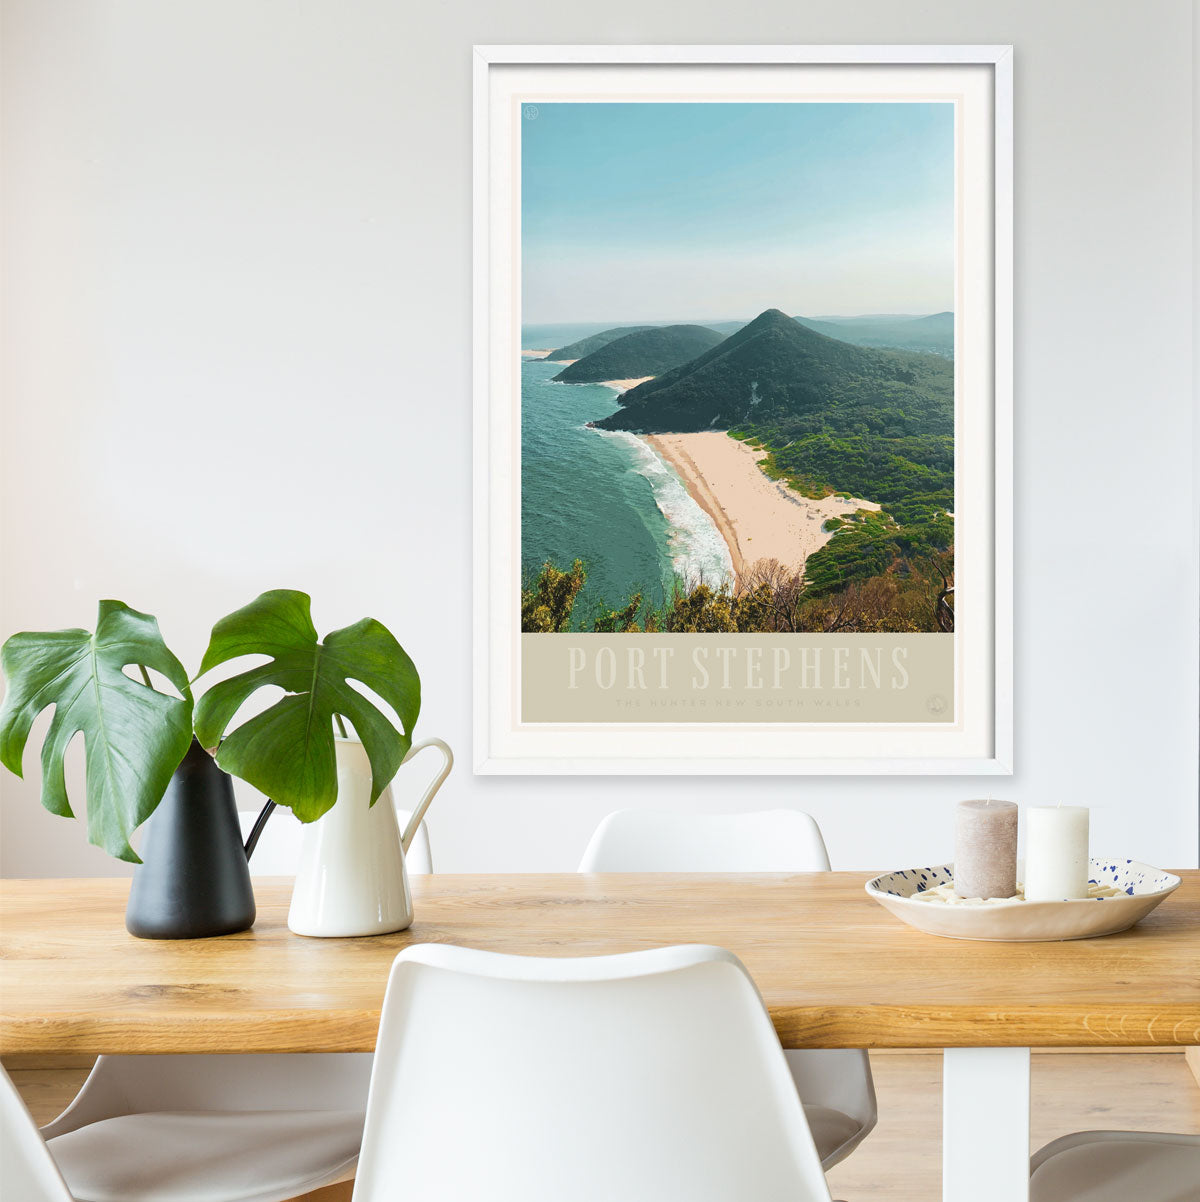 Port Stephens vintage retro print from Places We Luv